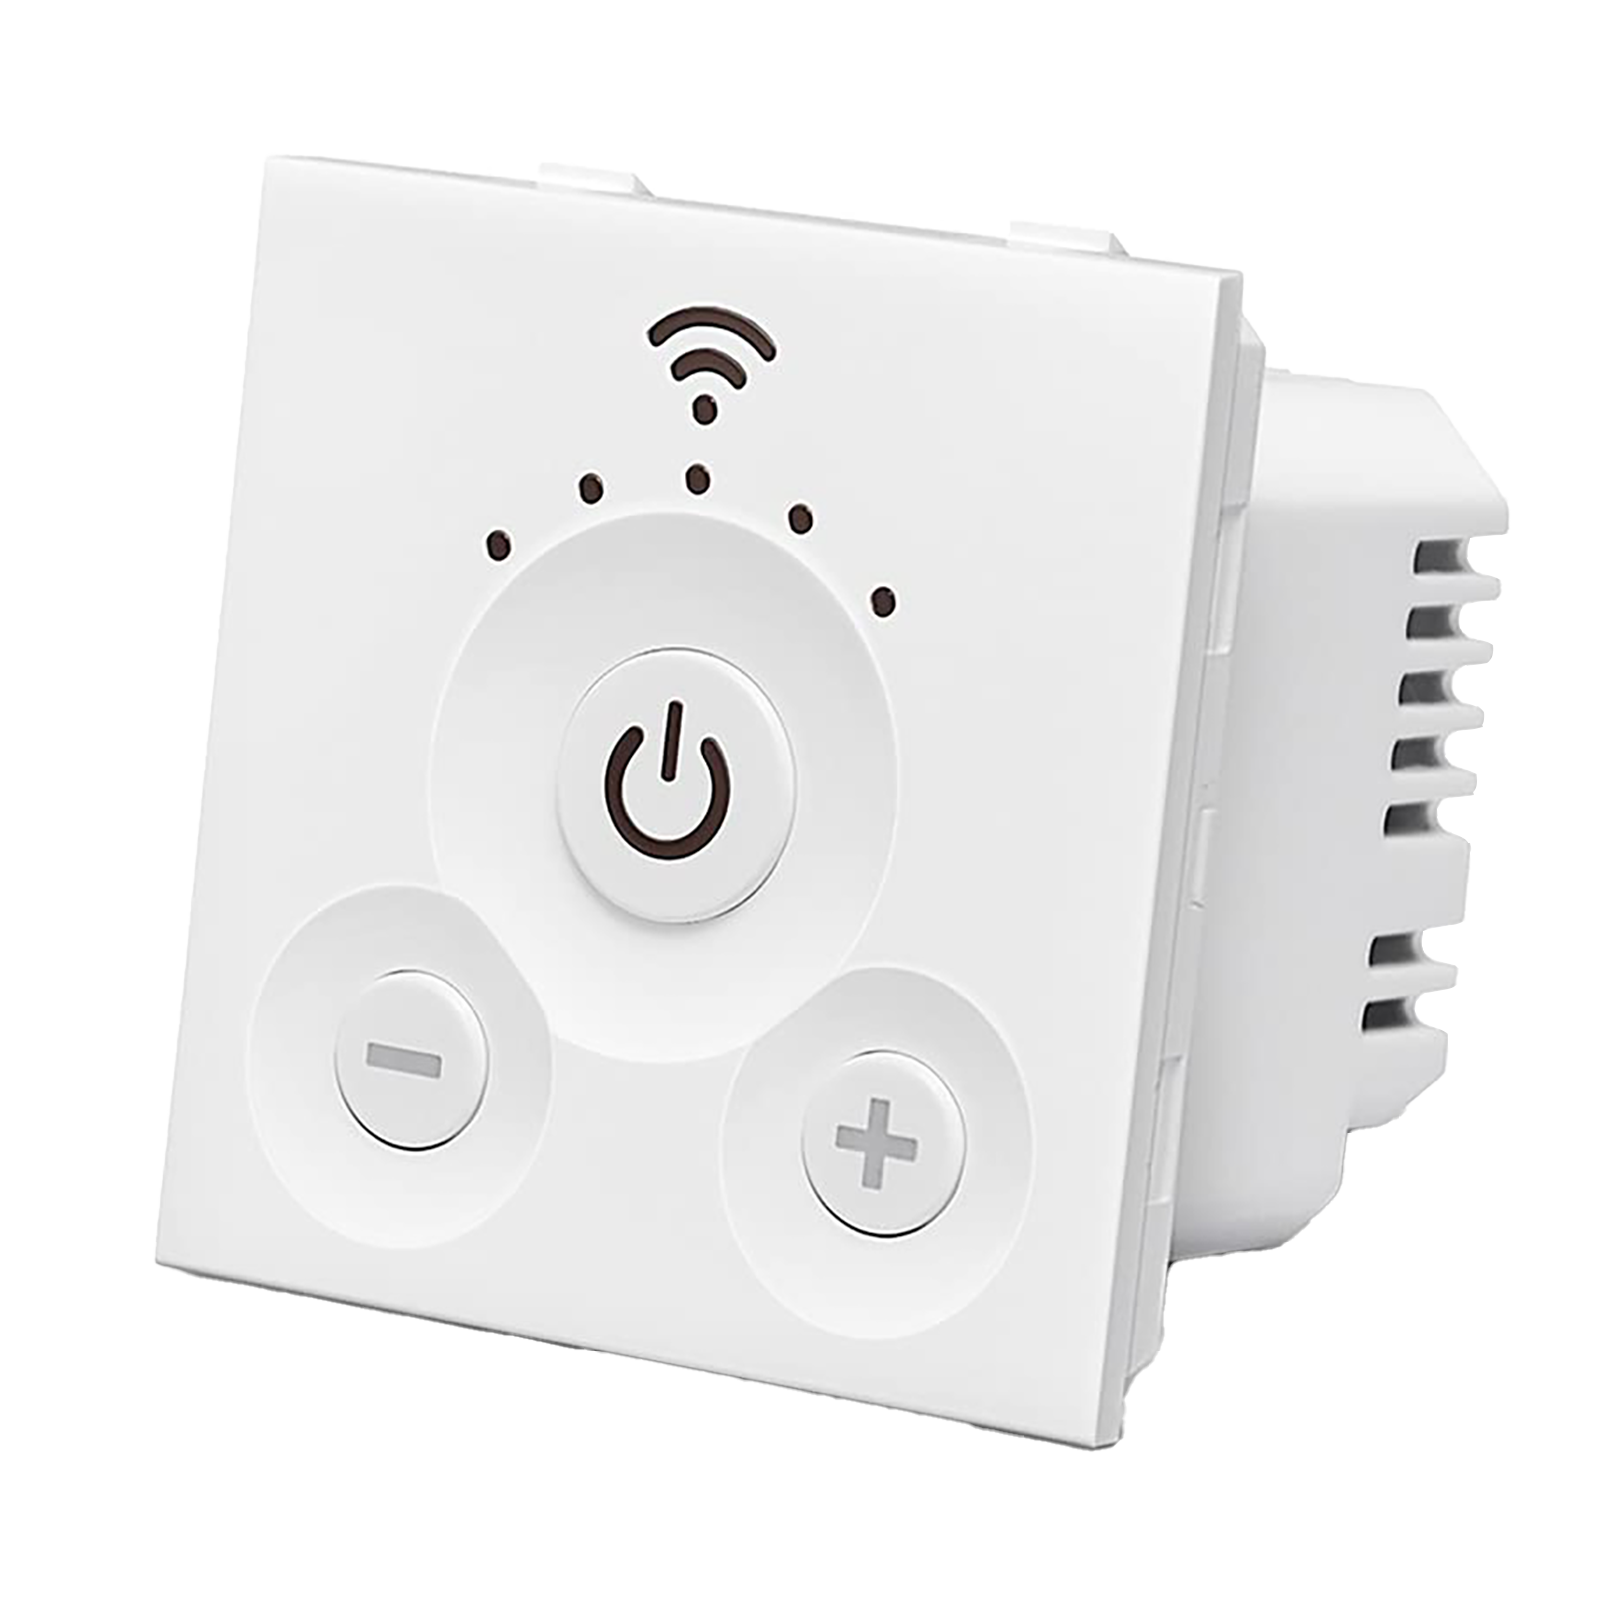 Tata Power EZ Home Smart Switch and Regulator (Google and Alexa Voice Assisted, FI-01-150 GWF-KM26, White)